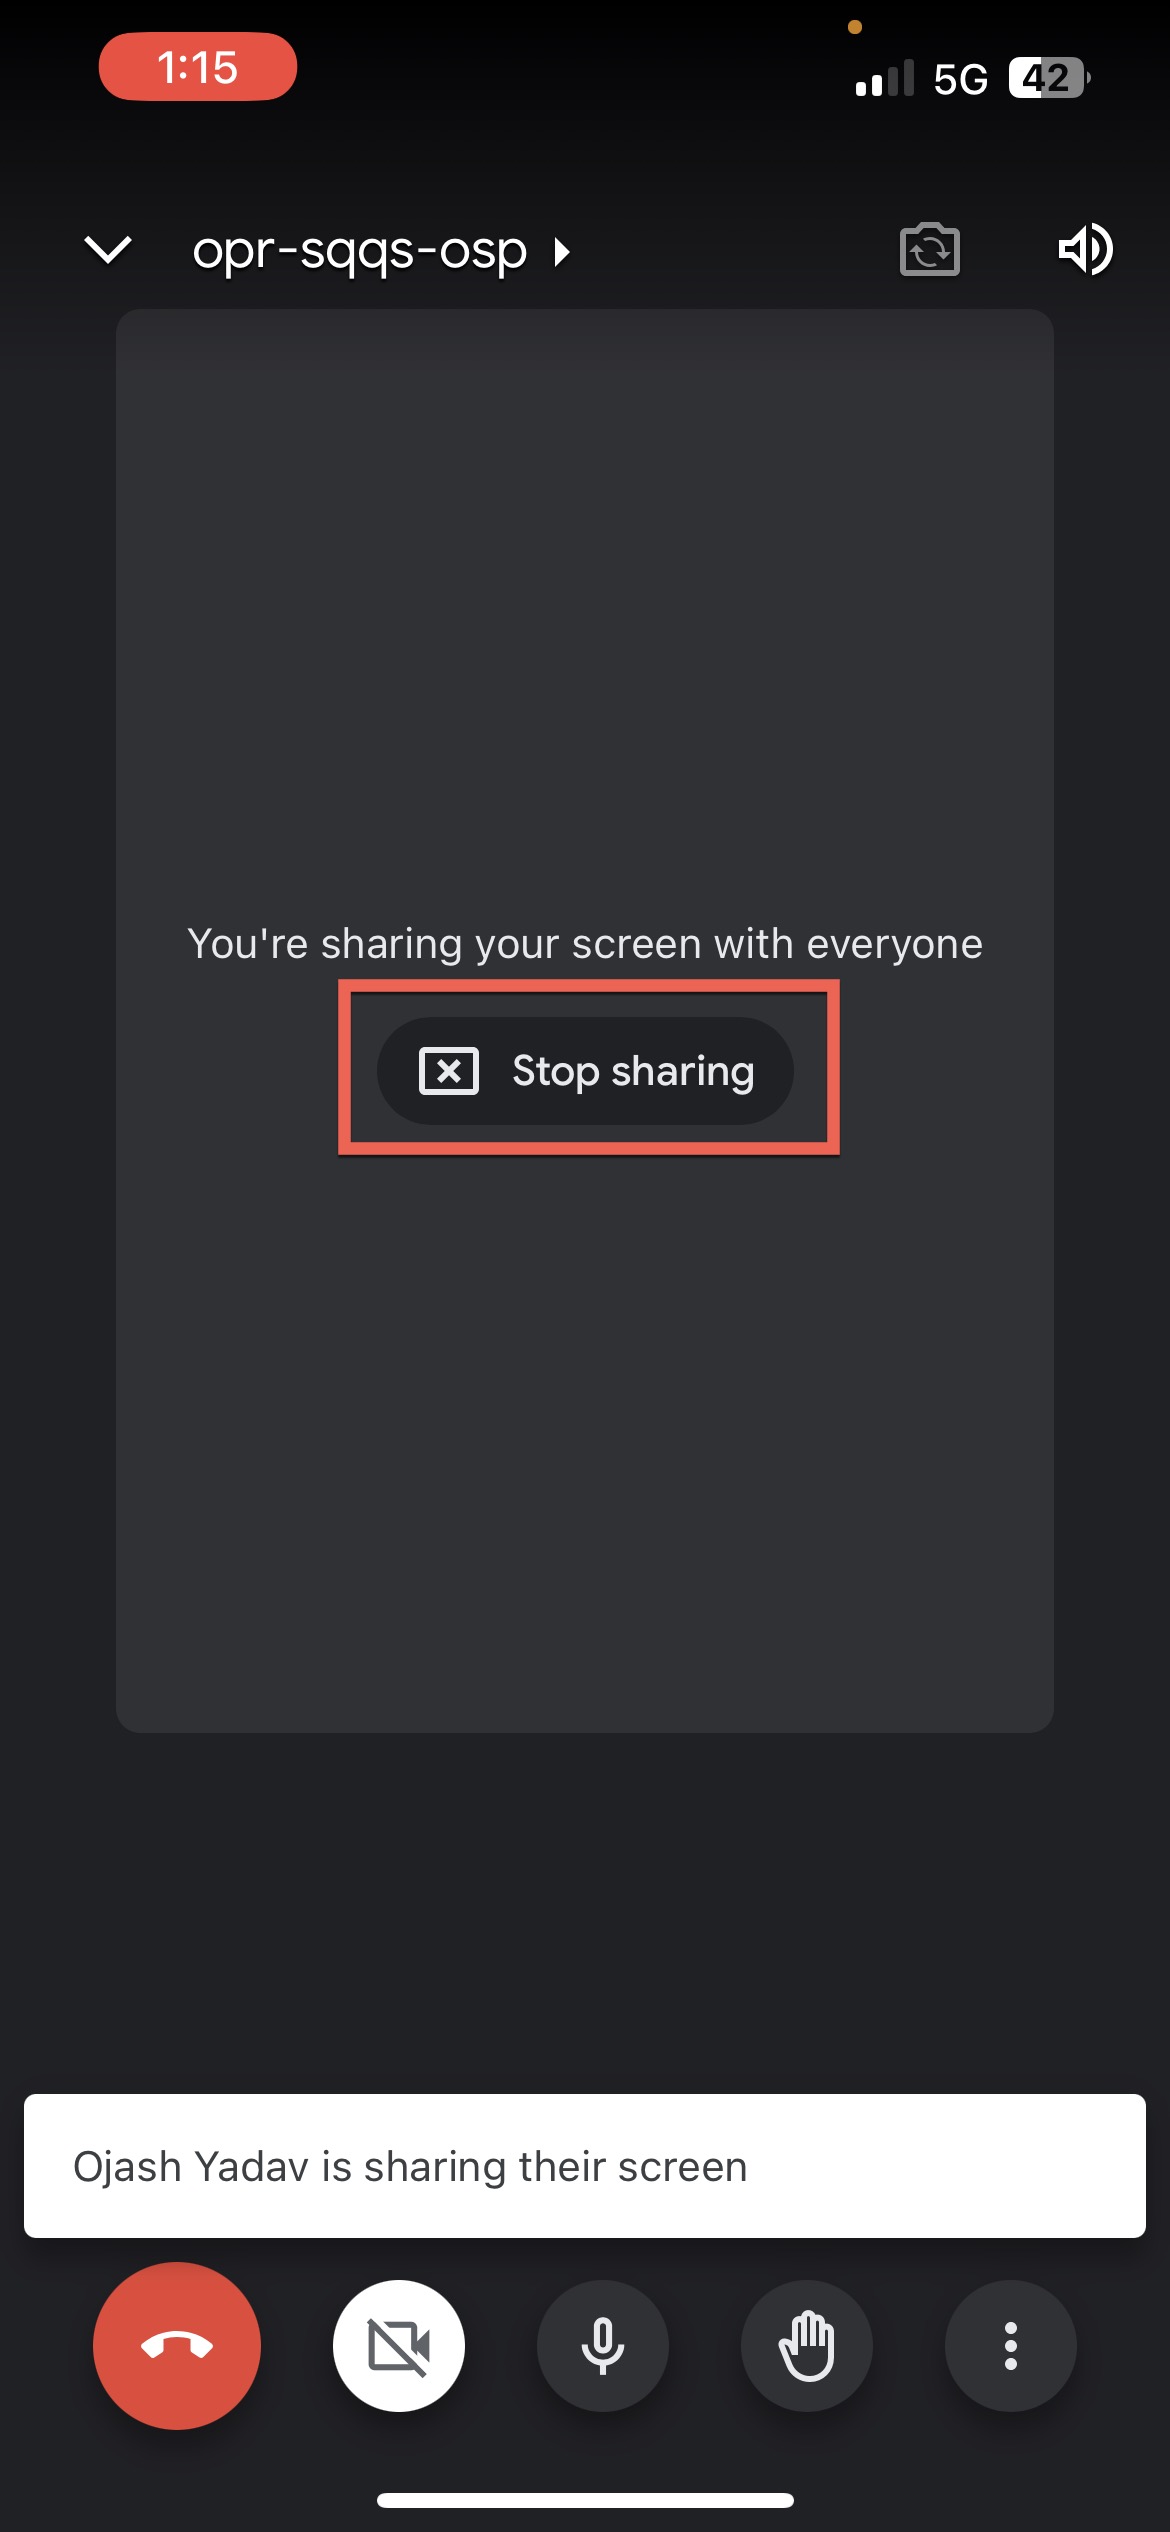 Tap on the Stop sharing button in Google Meet